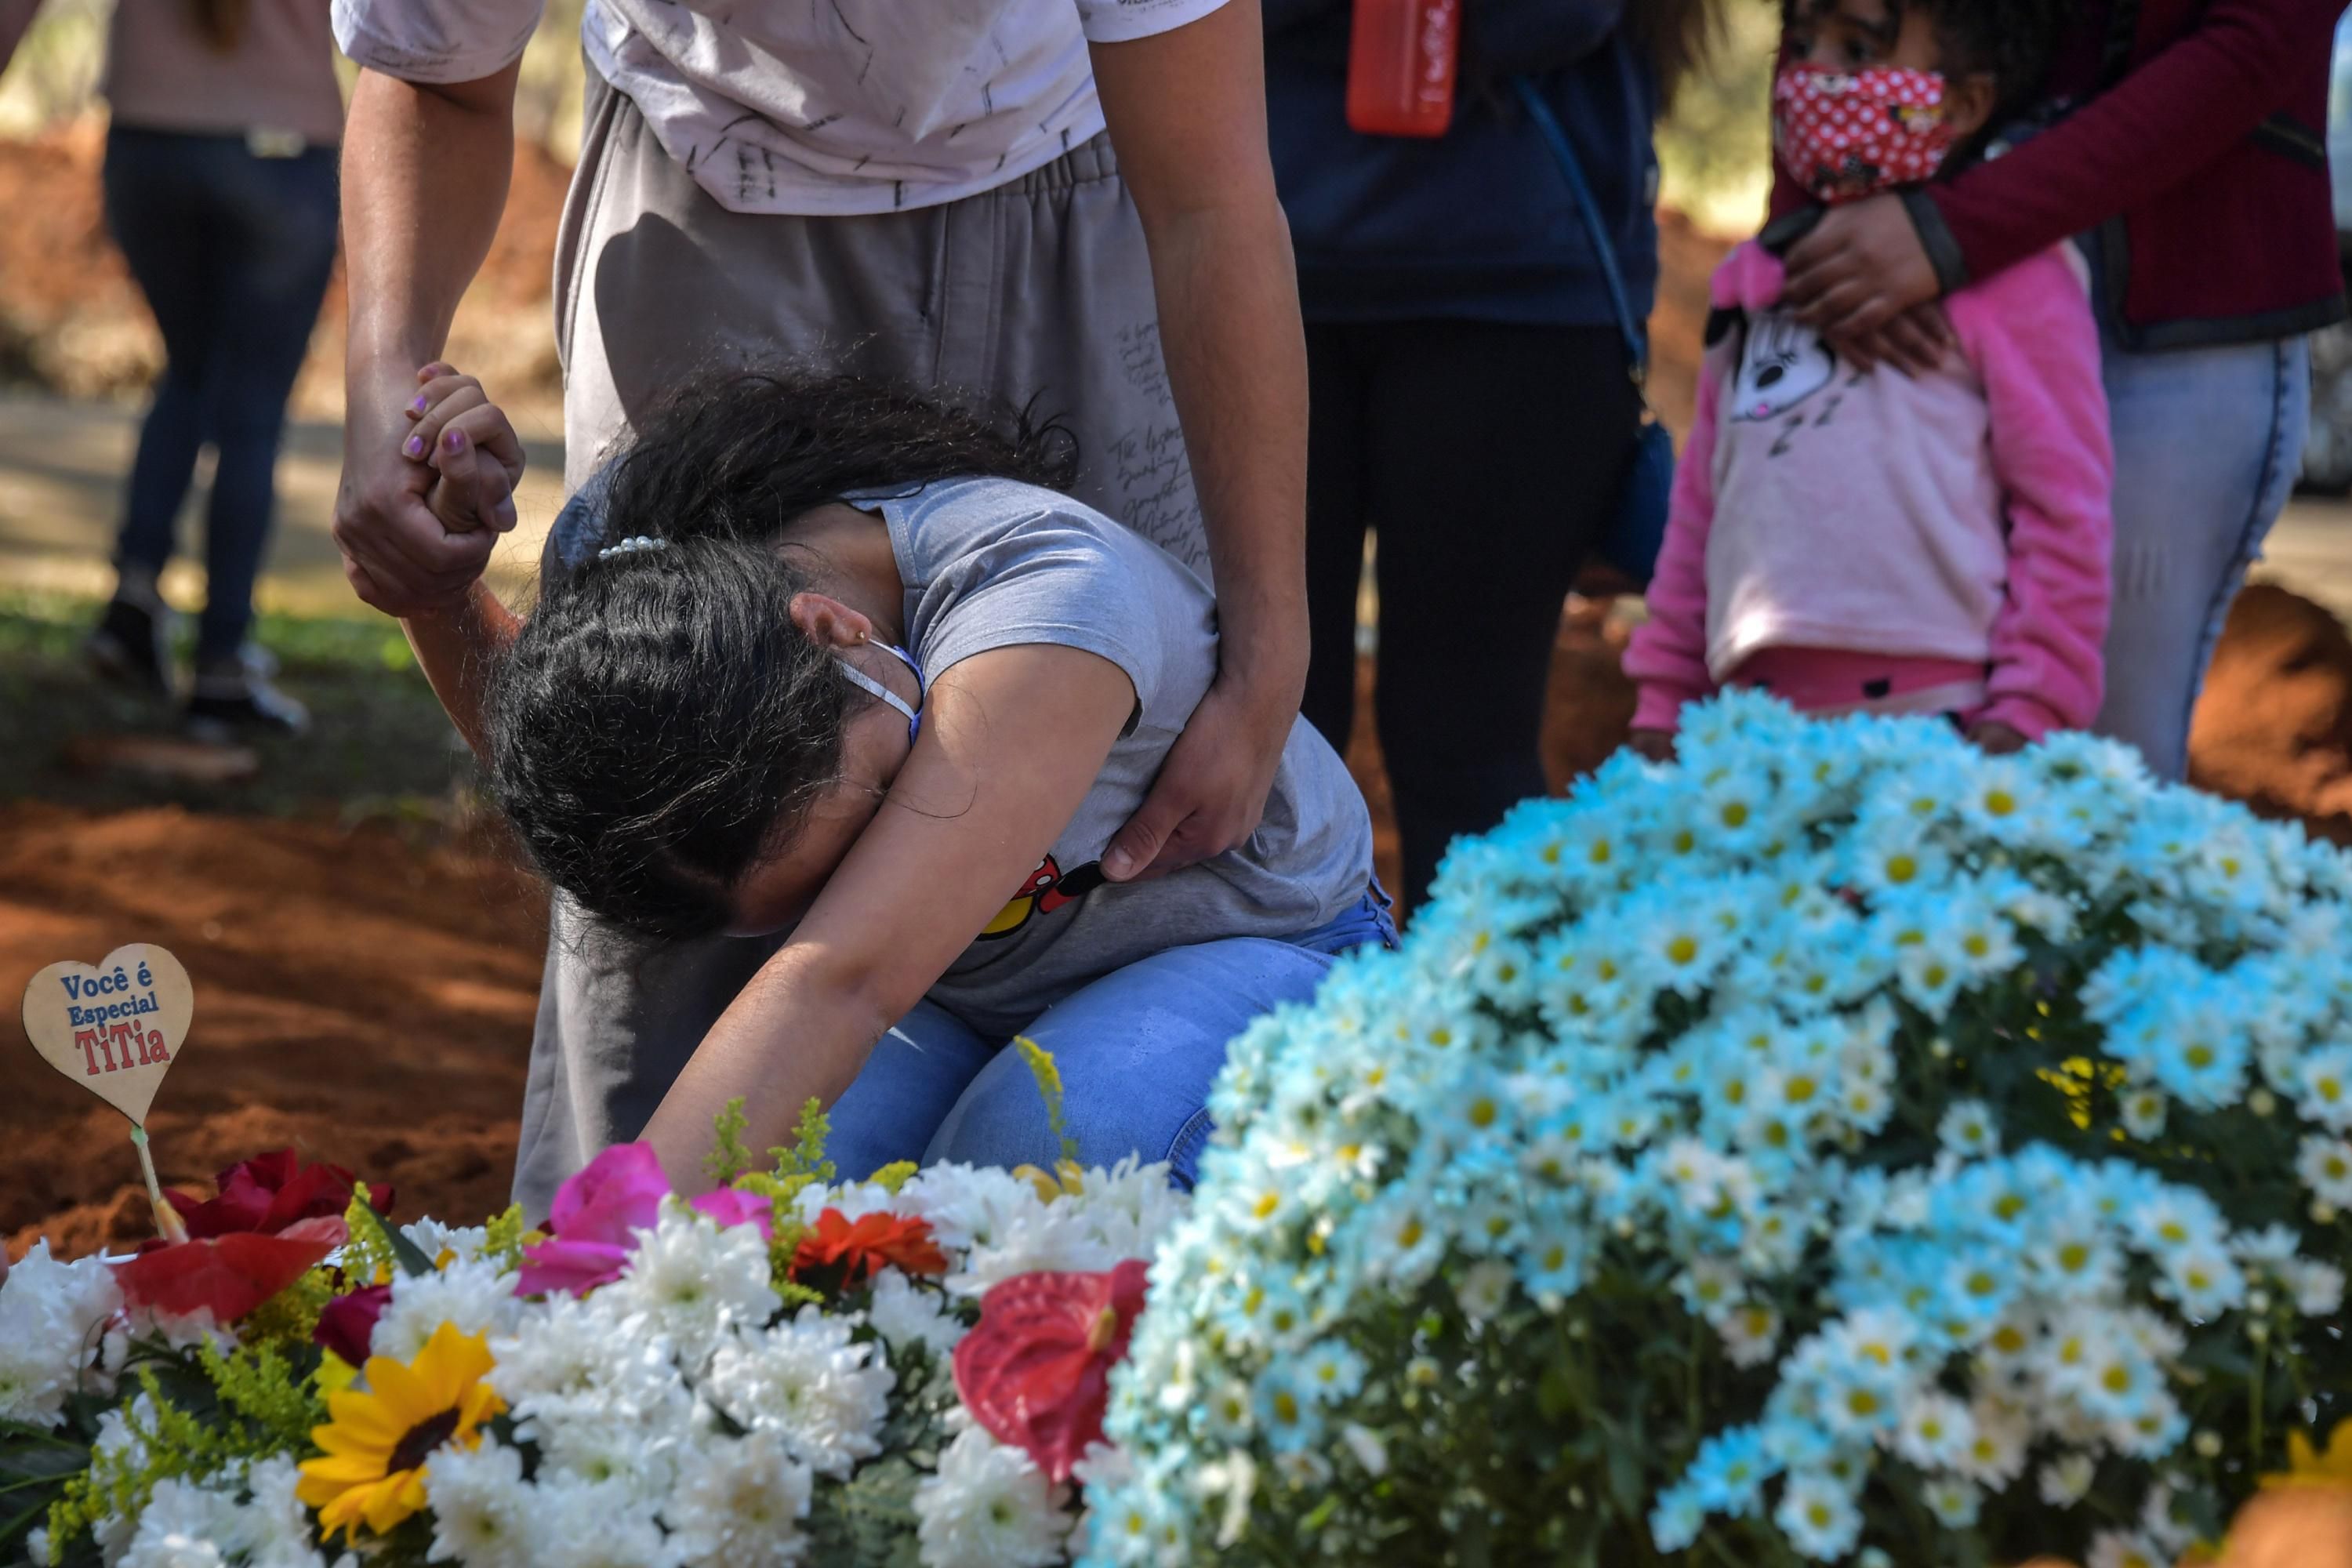 Relatives mourn during the burial of Covid-19 victim Maria Joana Nascimento at Vila Formosa Cemetery, in the outskirts of São Paulo, Brazil on August 6, 2020. (Photo: Nelson Almeida/AFP via Getty Images)